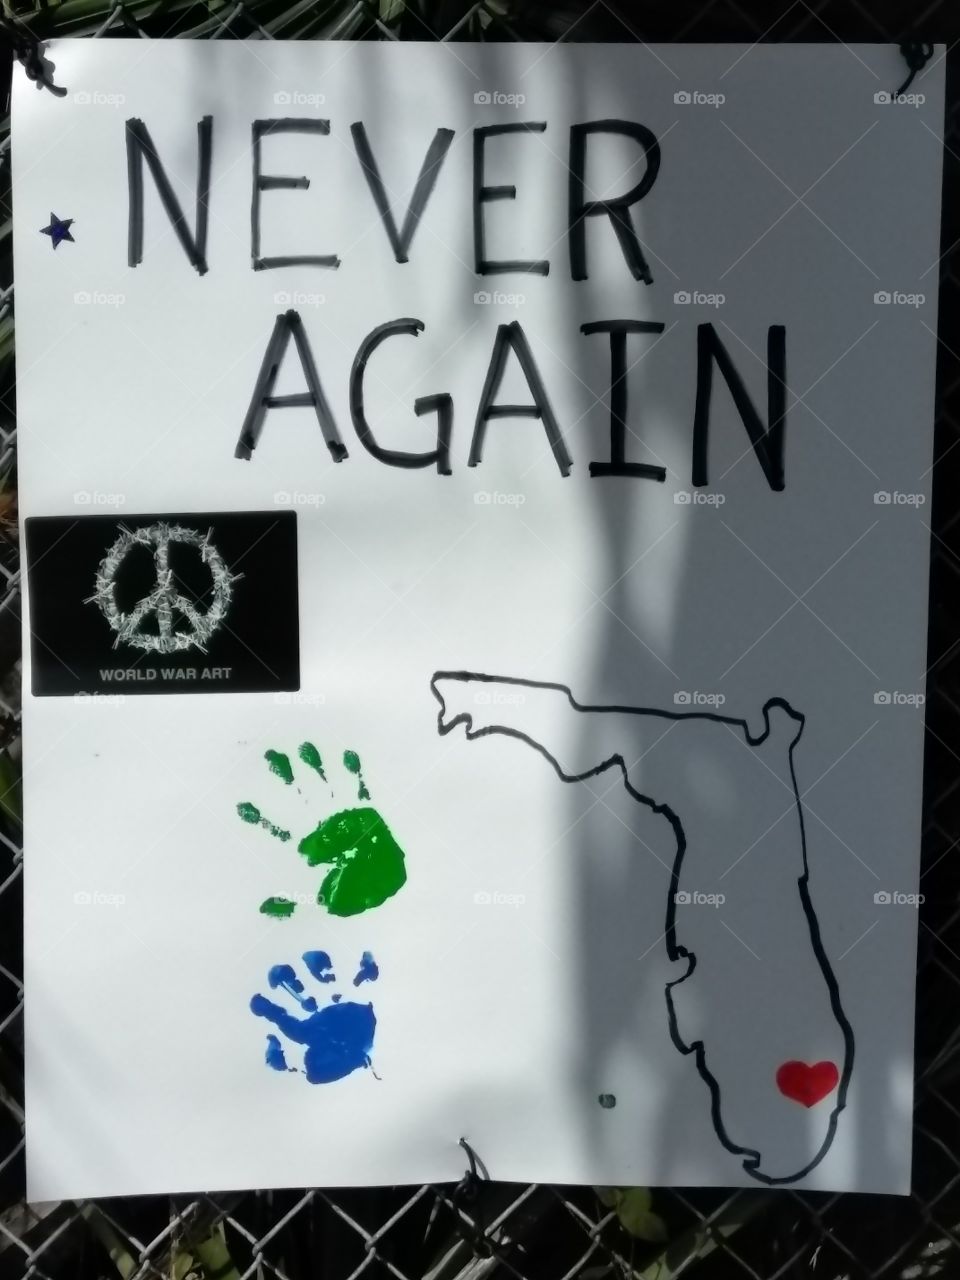 #Never Again Sign